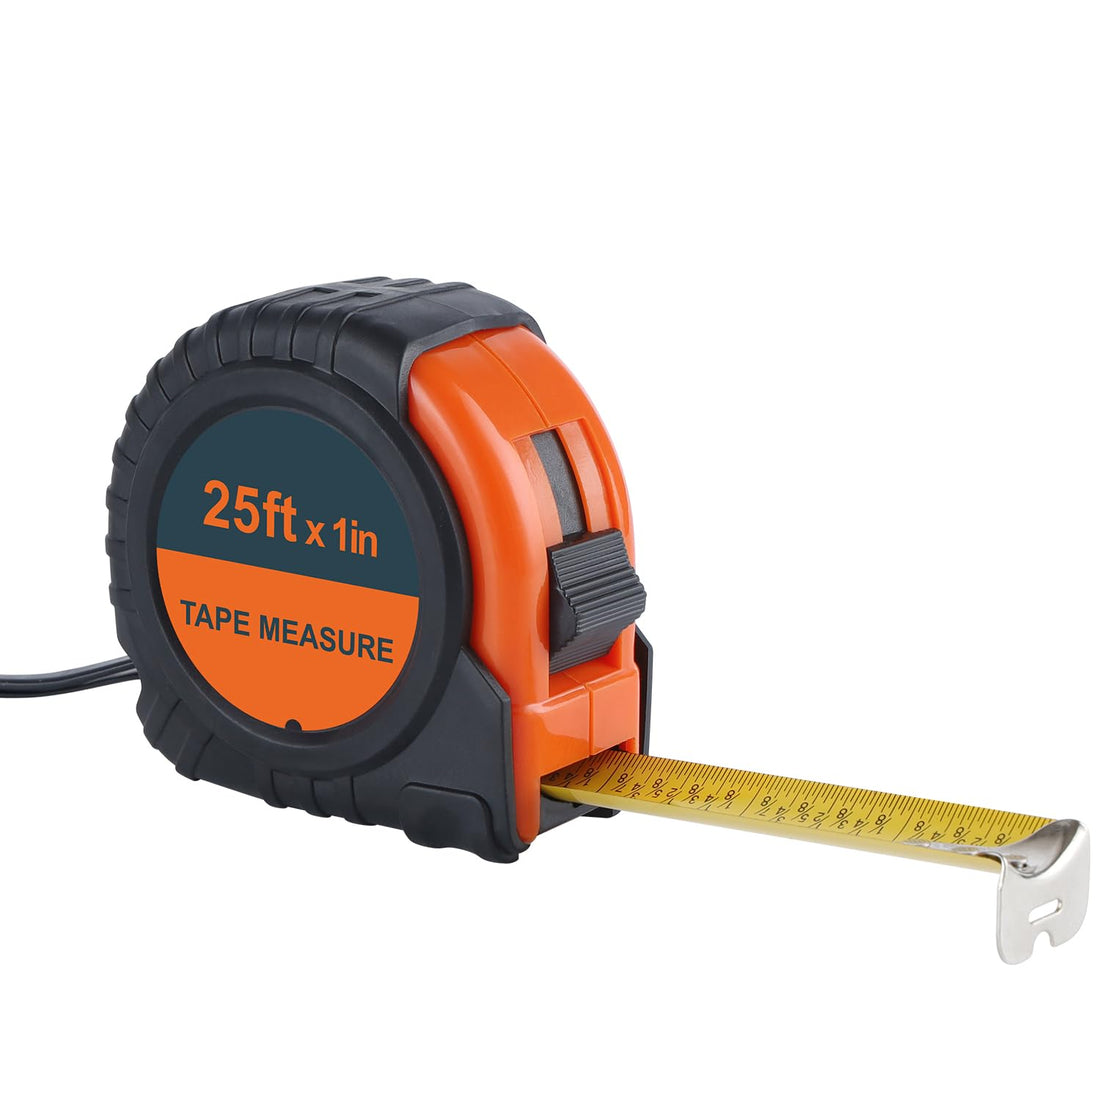 LICHAMP Tape Measure 25 ft, 1 Pack Easy Read Measuring Tape Retractable with Fractions 1/8, Measurement Tape 25-Foot by 1-Inch